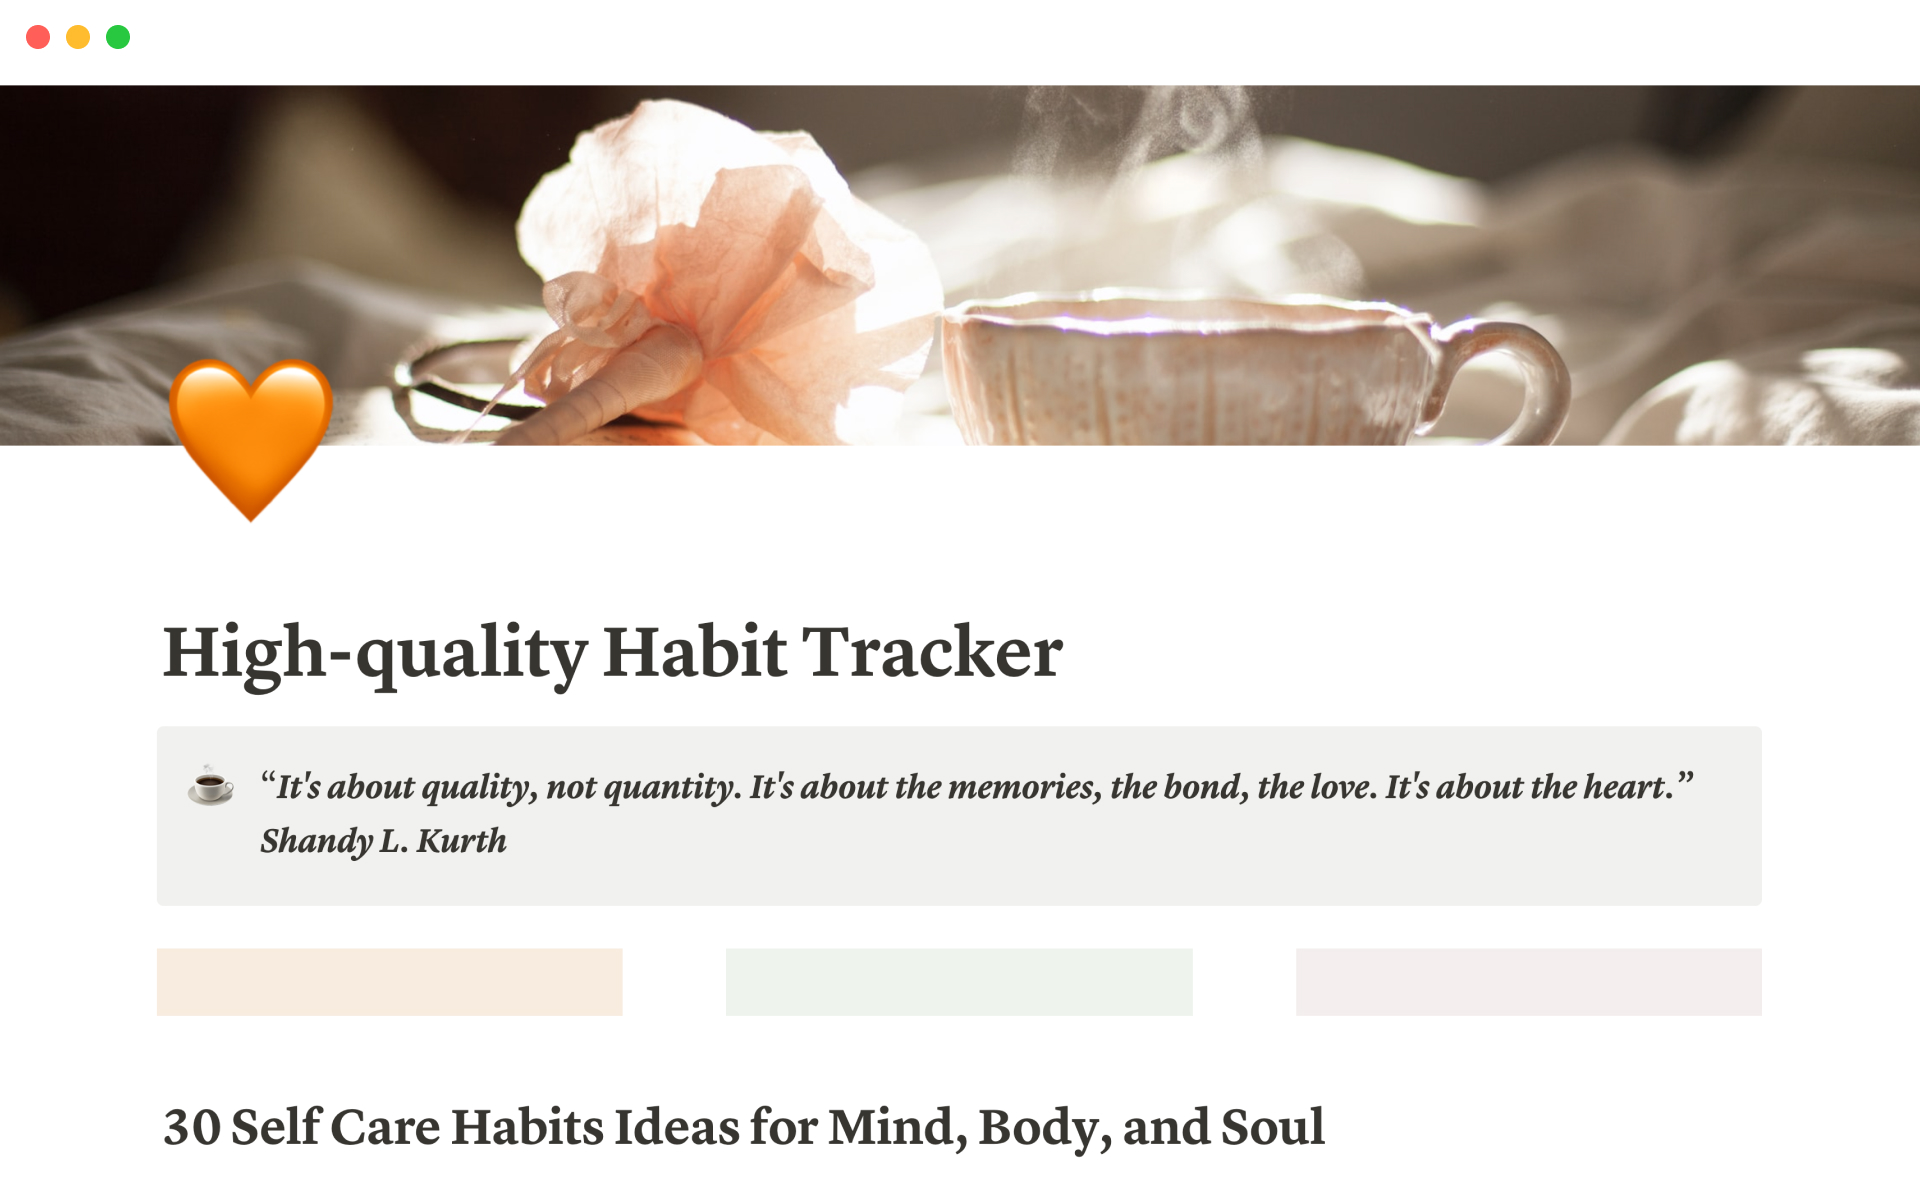 Track your habits to strive towards a fulfilling and high-quality life.